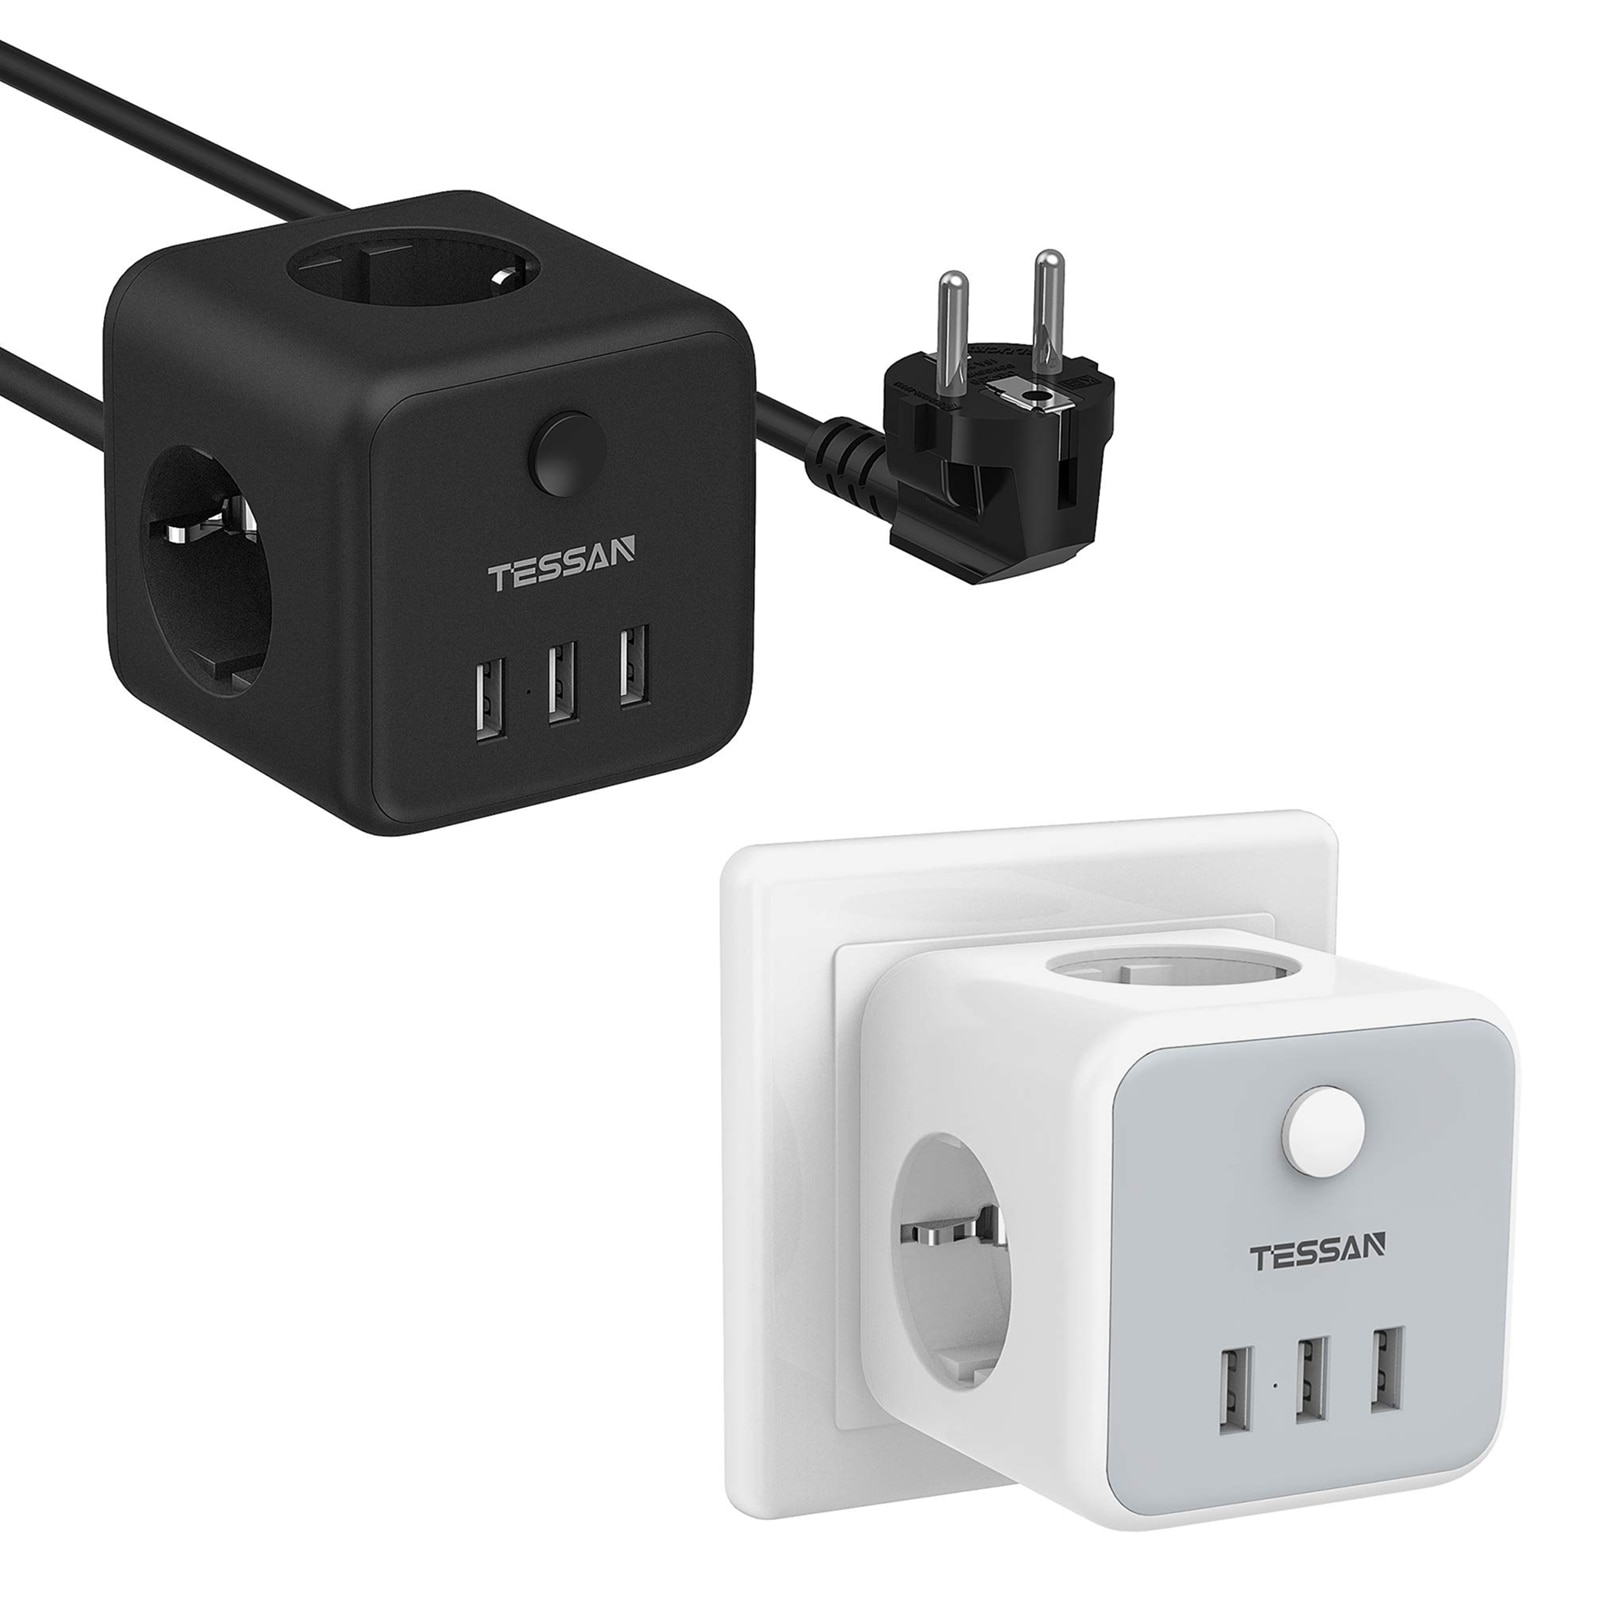 Save Up to 50% off Tessan Power Strip and Multi-outlets at Amazon - dealepic